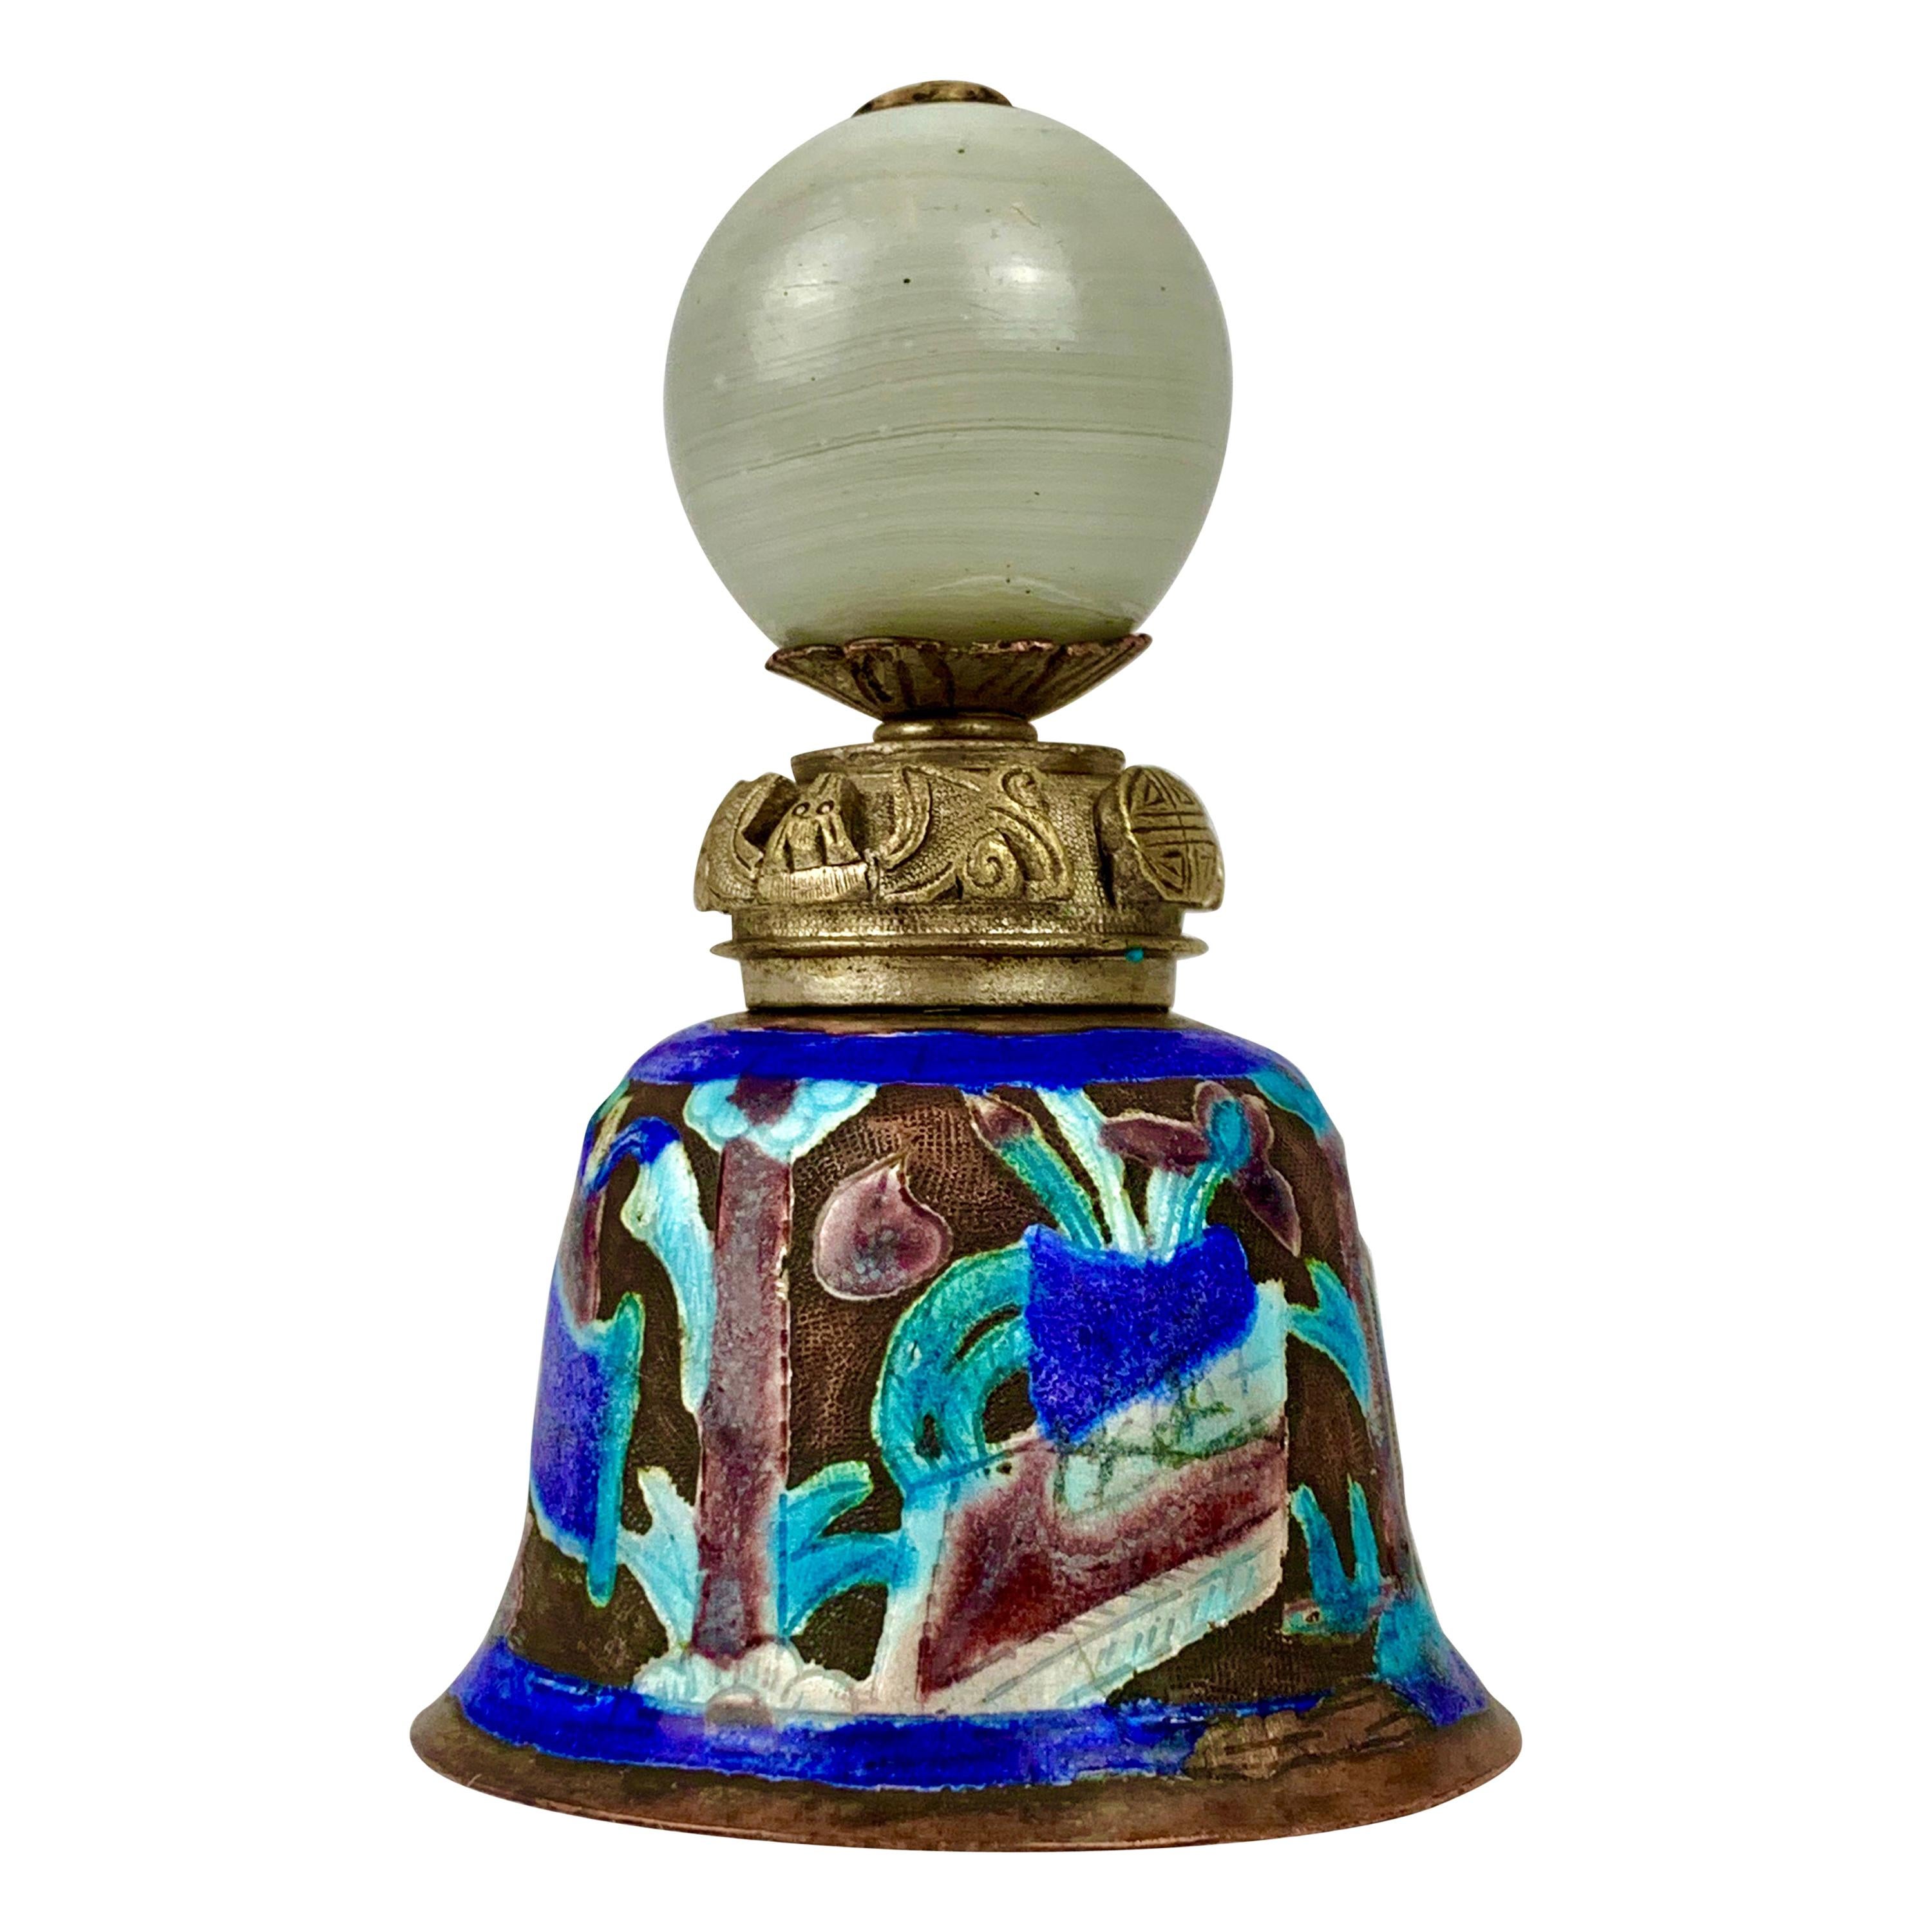  Antique Chinese Enameled Bell-Silver on Copper with peking glass finial